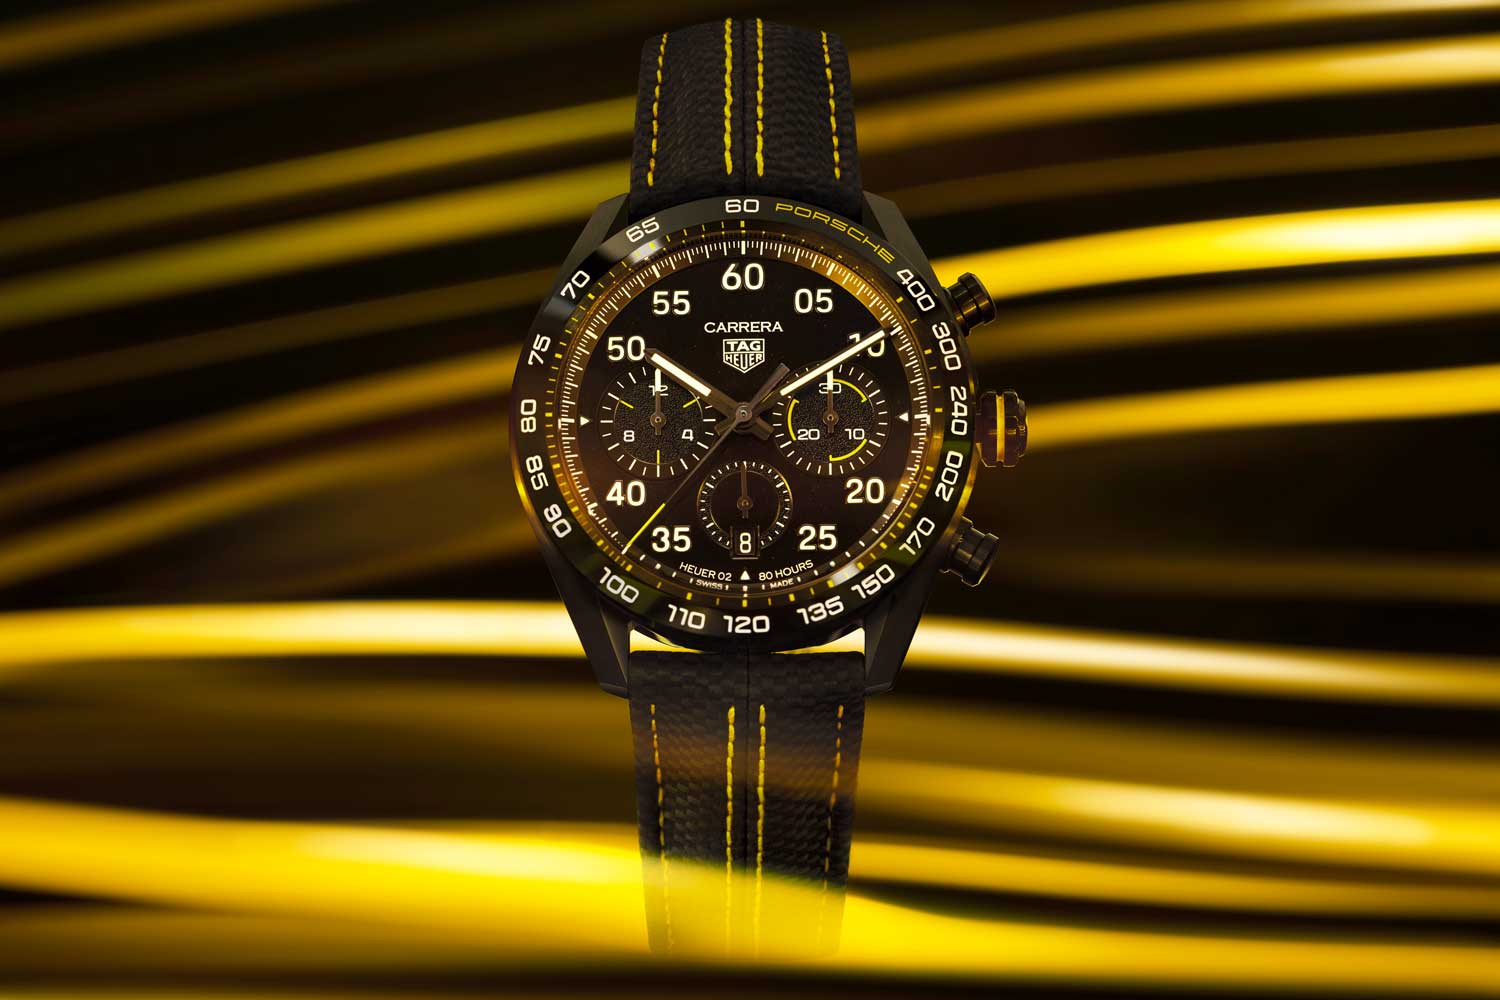 Black and yellow dominate in the latest expression in the partnership between TAG Heuer and Porsche